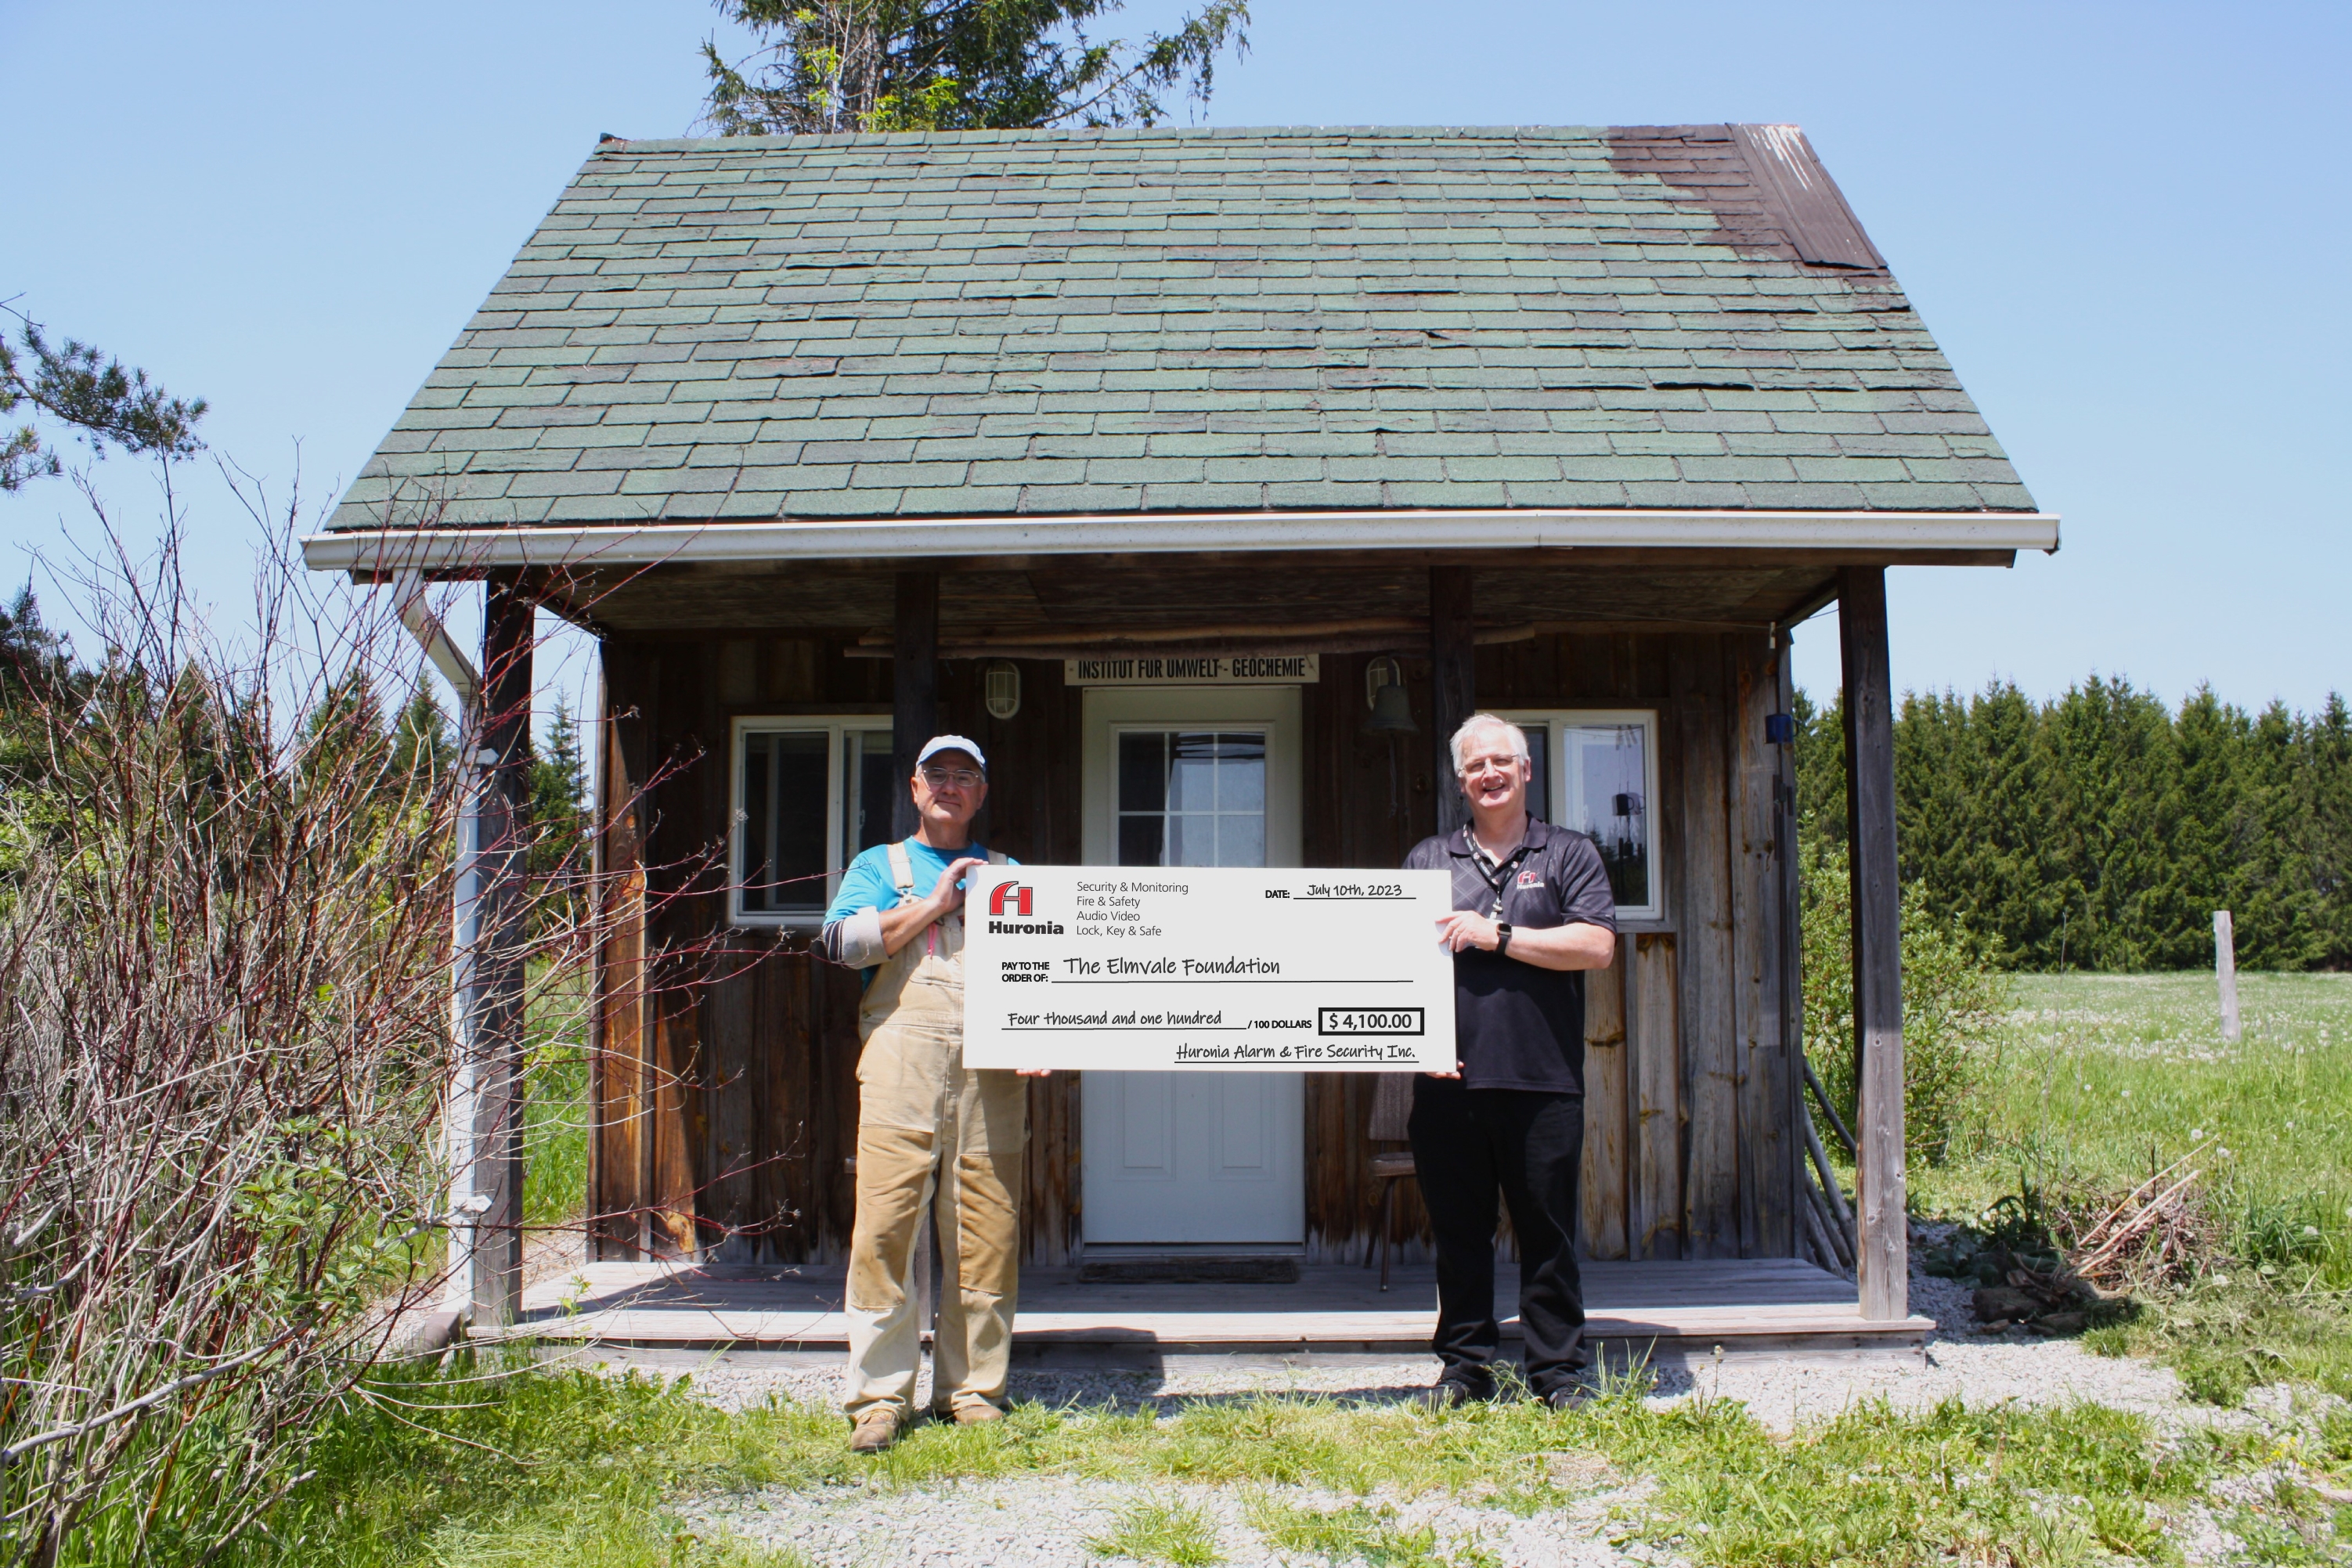 Huronia Alarm & Fire Security Inc. makes a $4,100 donation to the Elmvale Foundation.